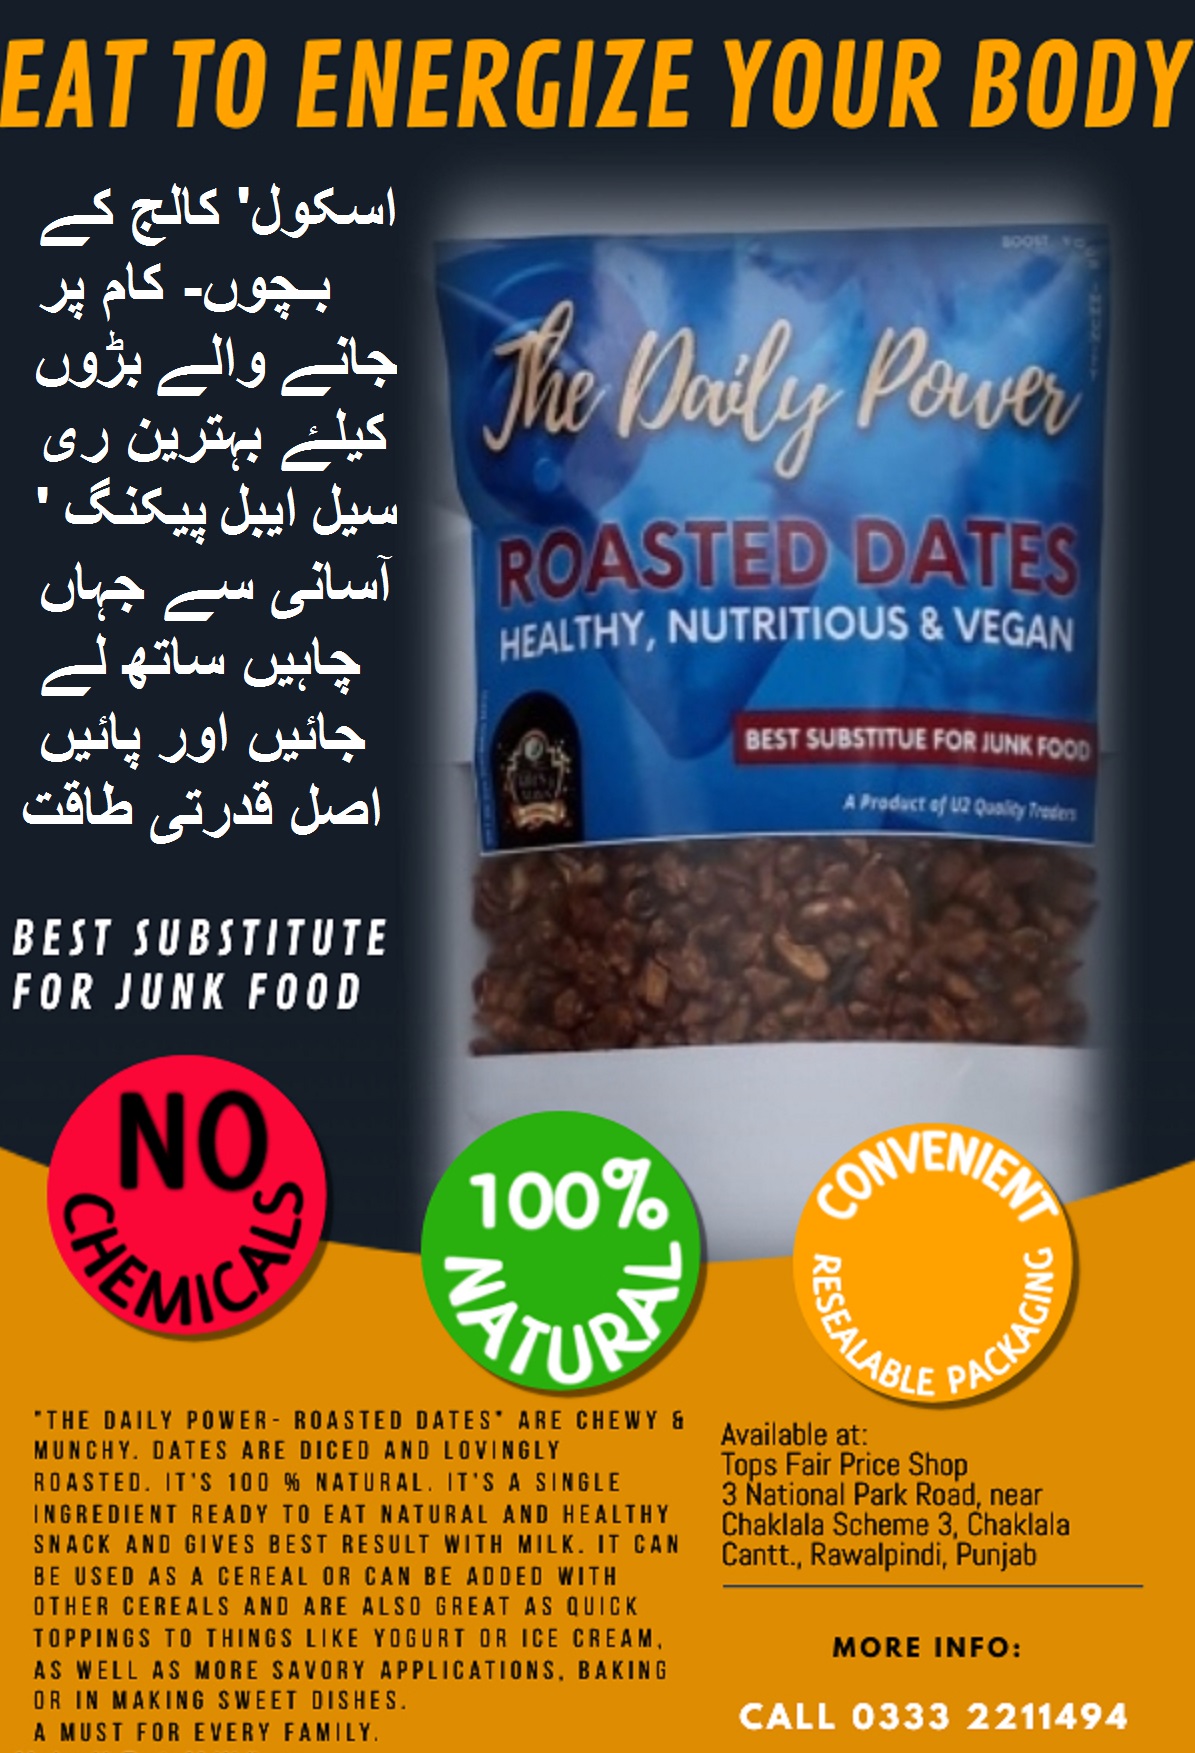 Roasted Dates- The Daily Power